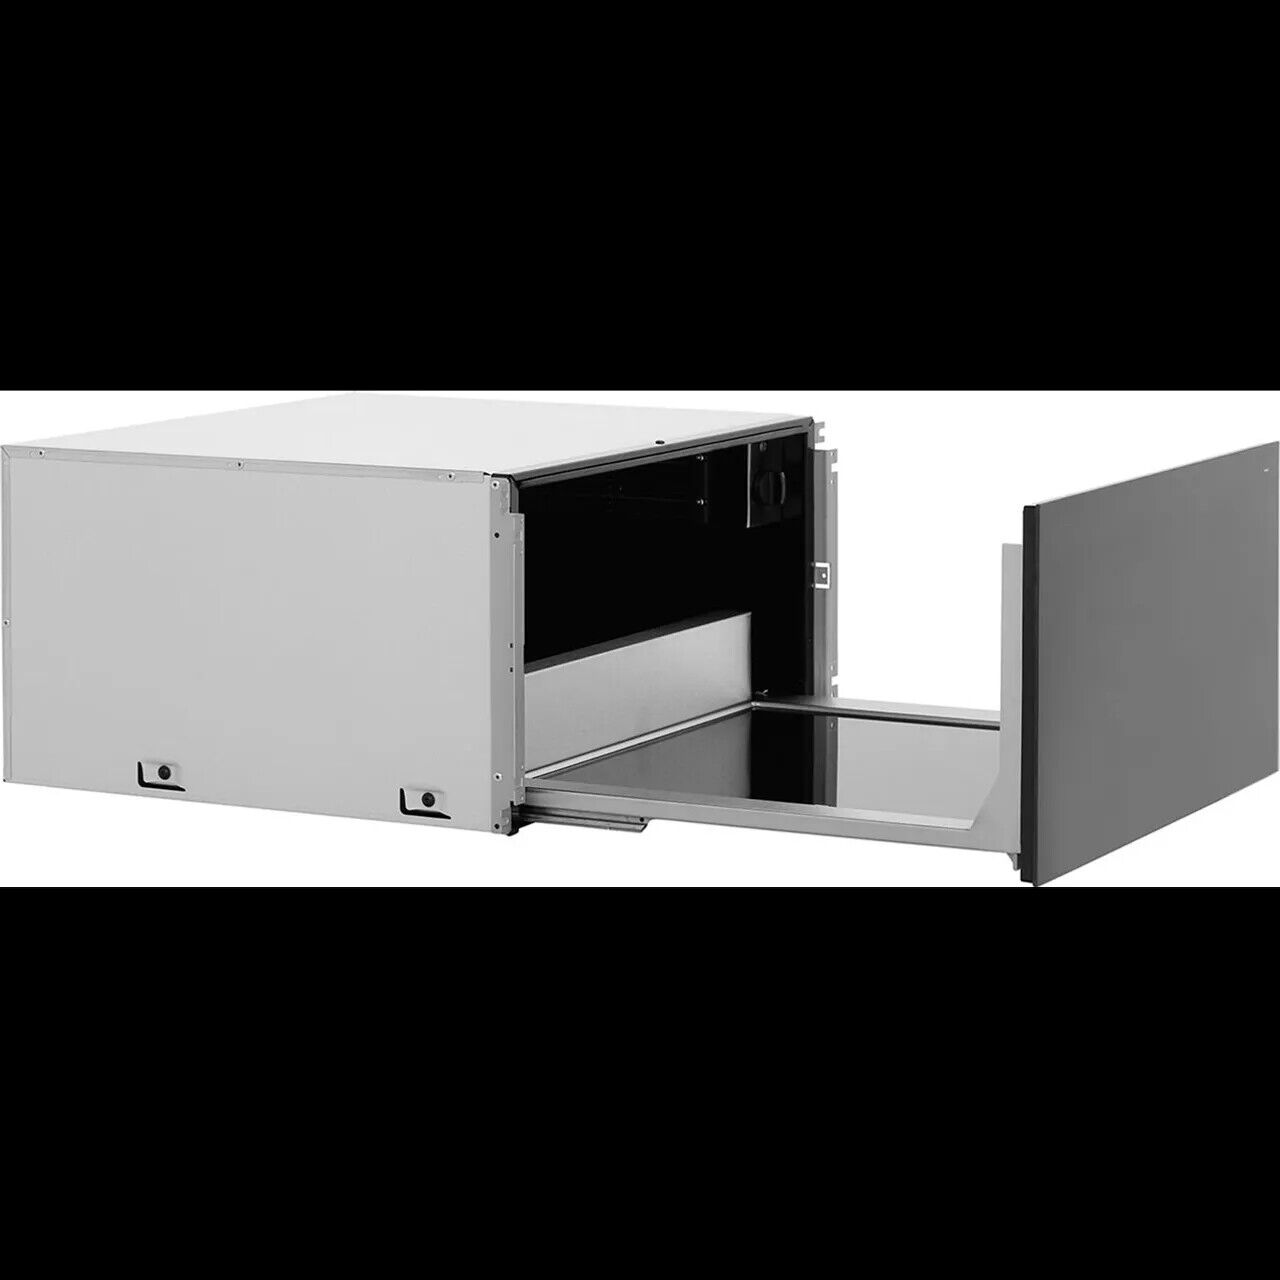 NEFF N90 N17HH20N0B Warming Drawer – 2 YEARS PARTS AND LABOUR WARRANTY